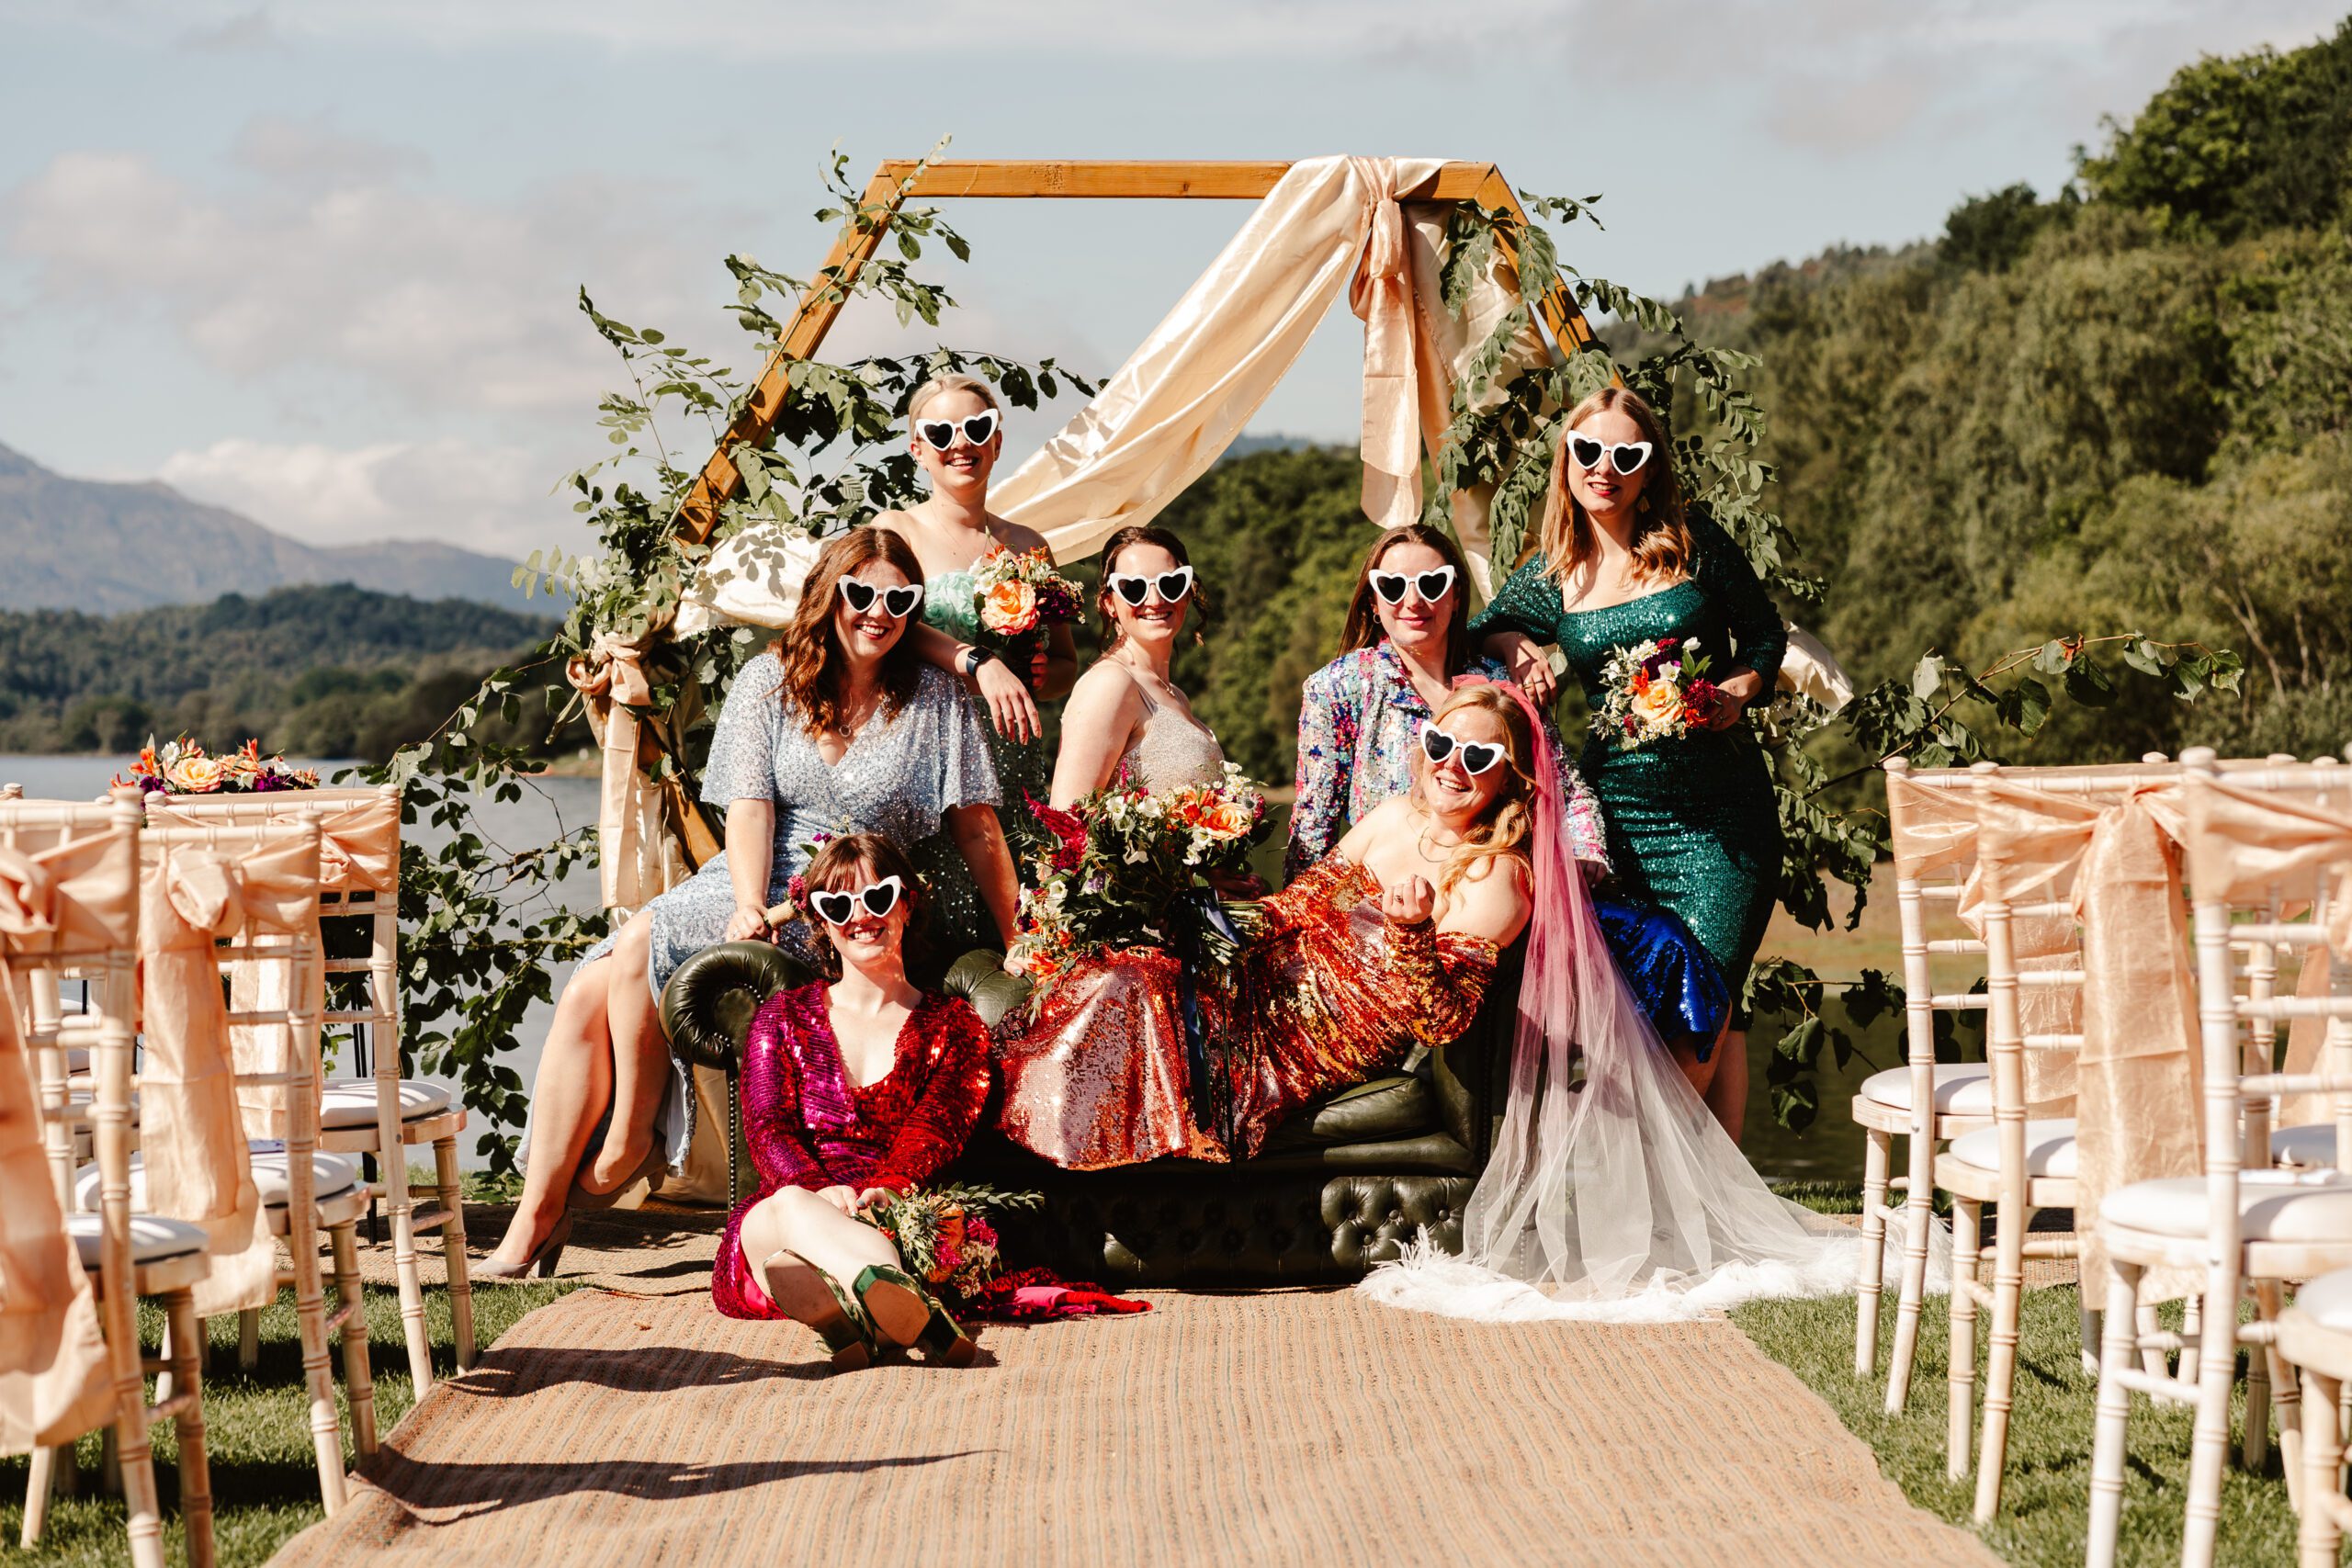 Bridal party wearing sequin dresses pose on sofa at scottish outdoor wedding wearing heart shaped sunglasses